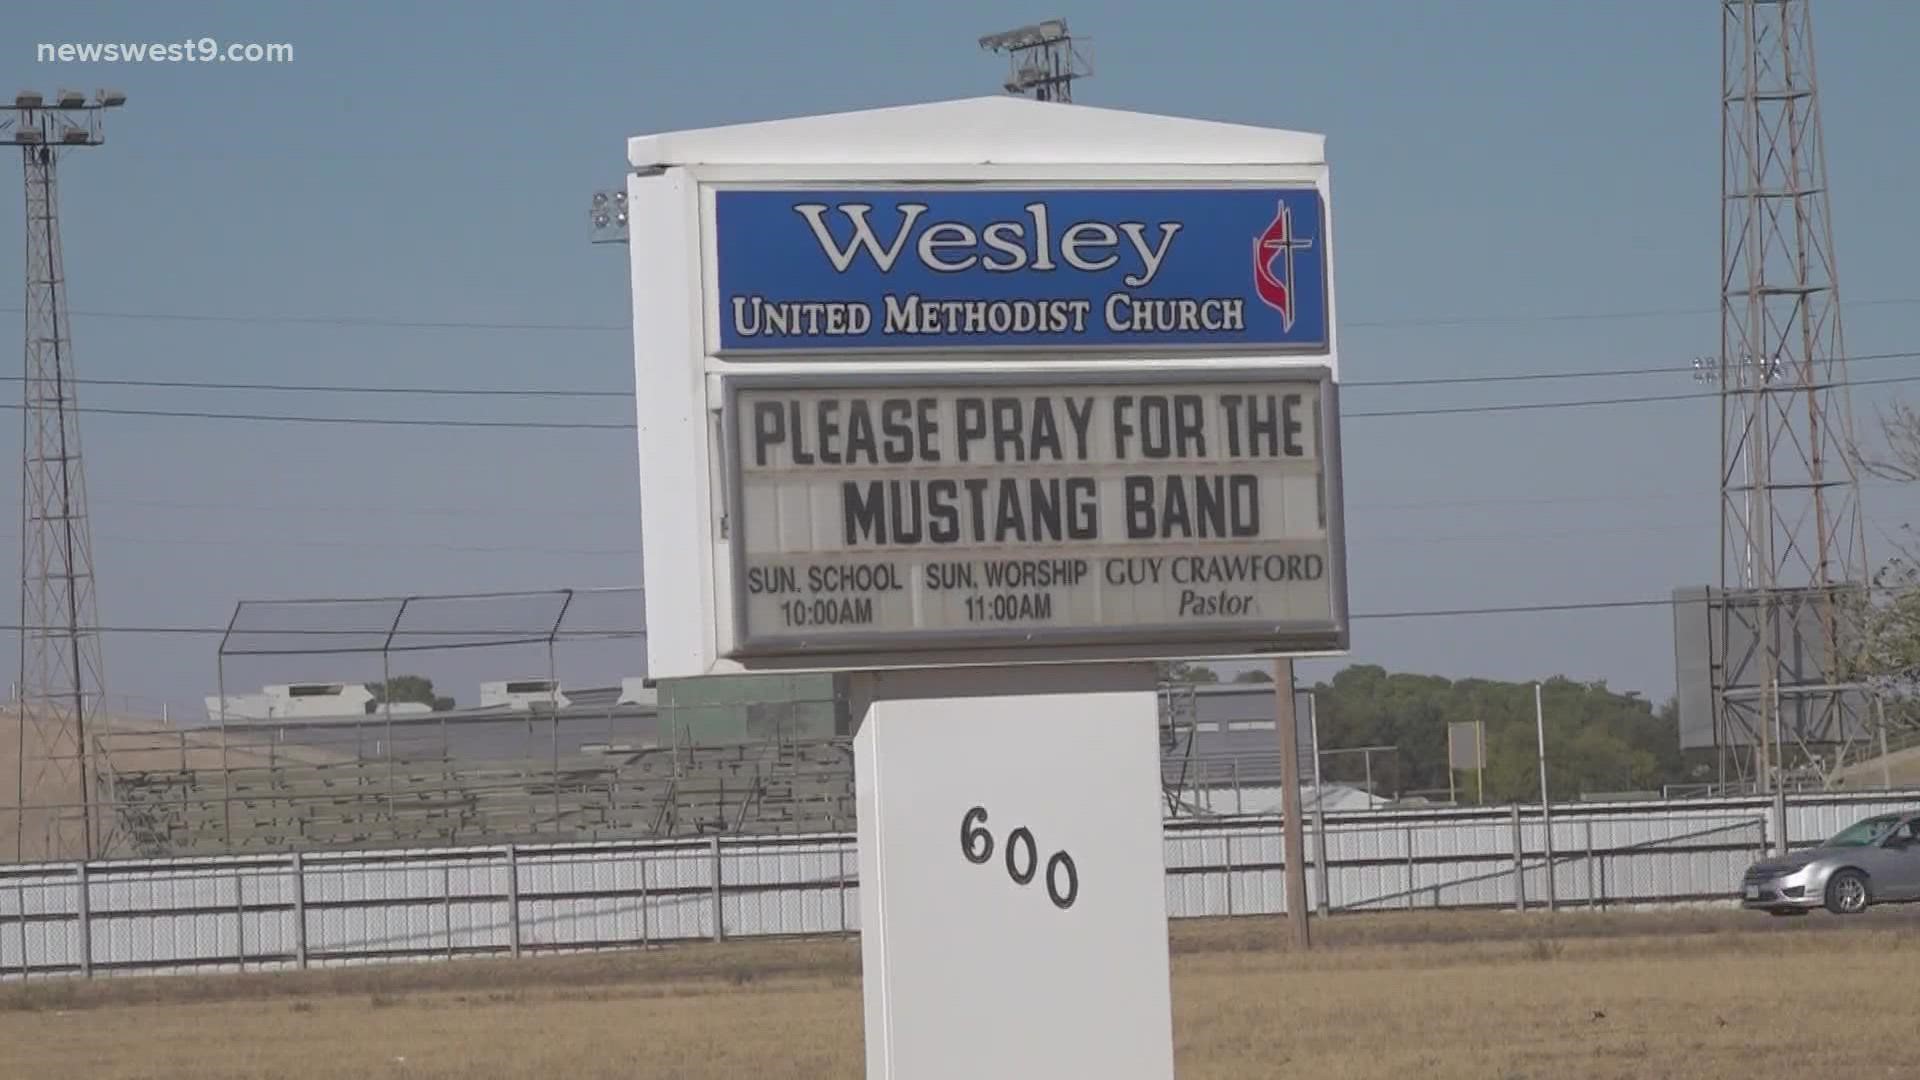 "You know we're the mighty Mustangs, that's what we do, we love and support one another."